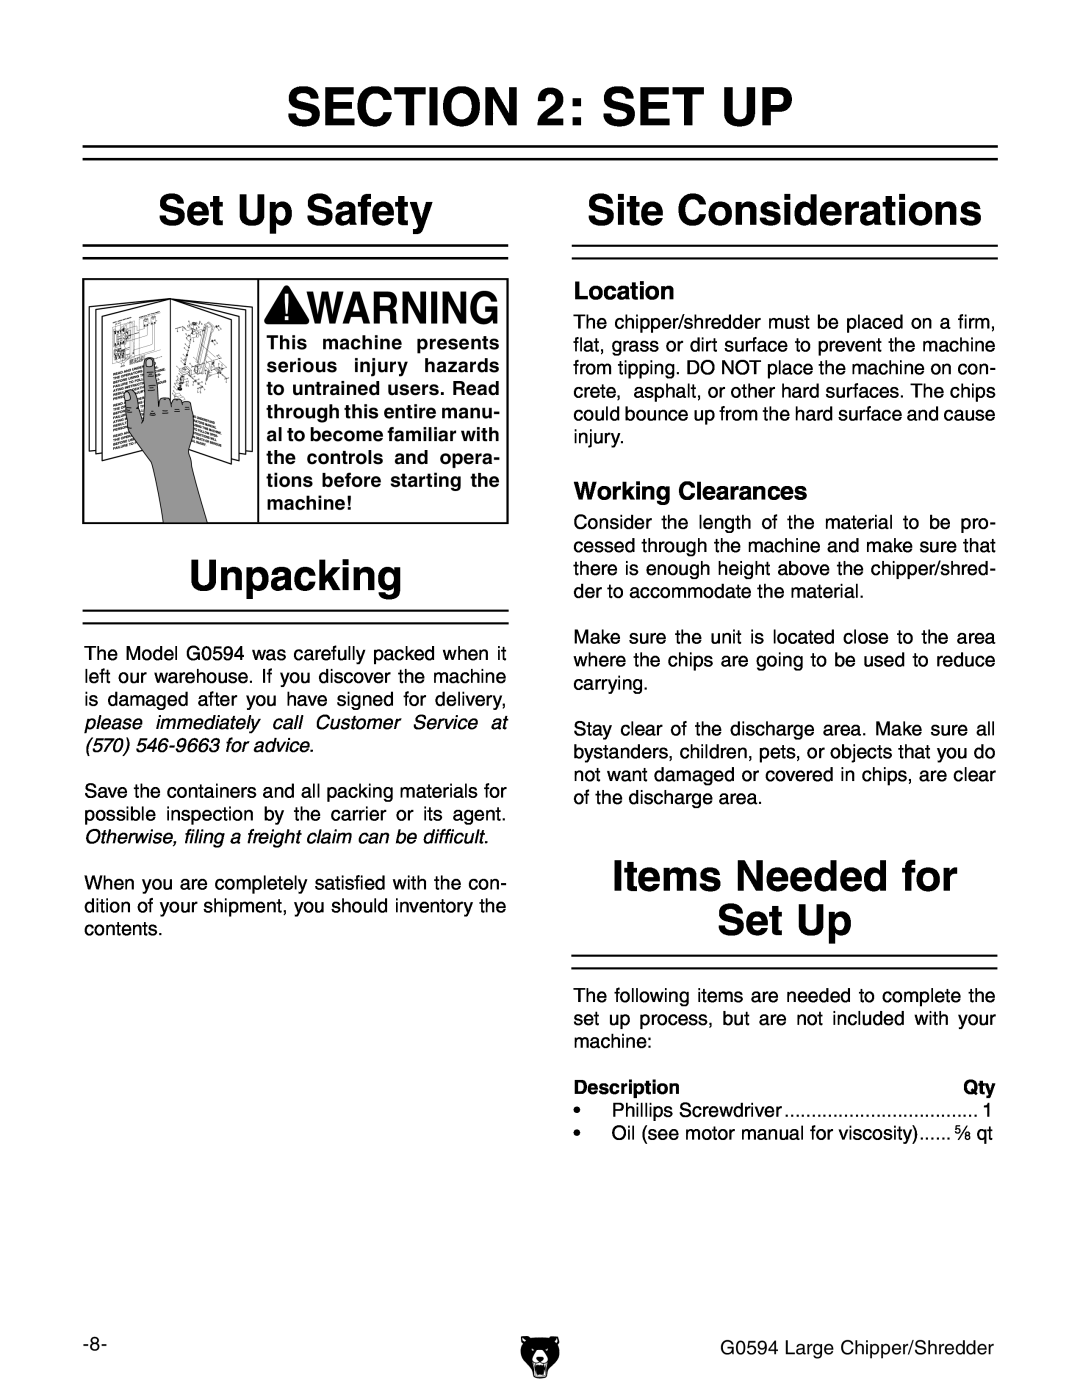 Grizzly G0594 Set Up Safety, Unpacking, Site Considerations, Items Needed for Set Up, Description, Location 